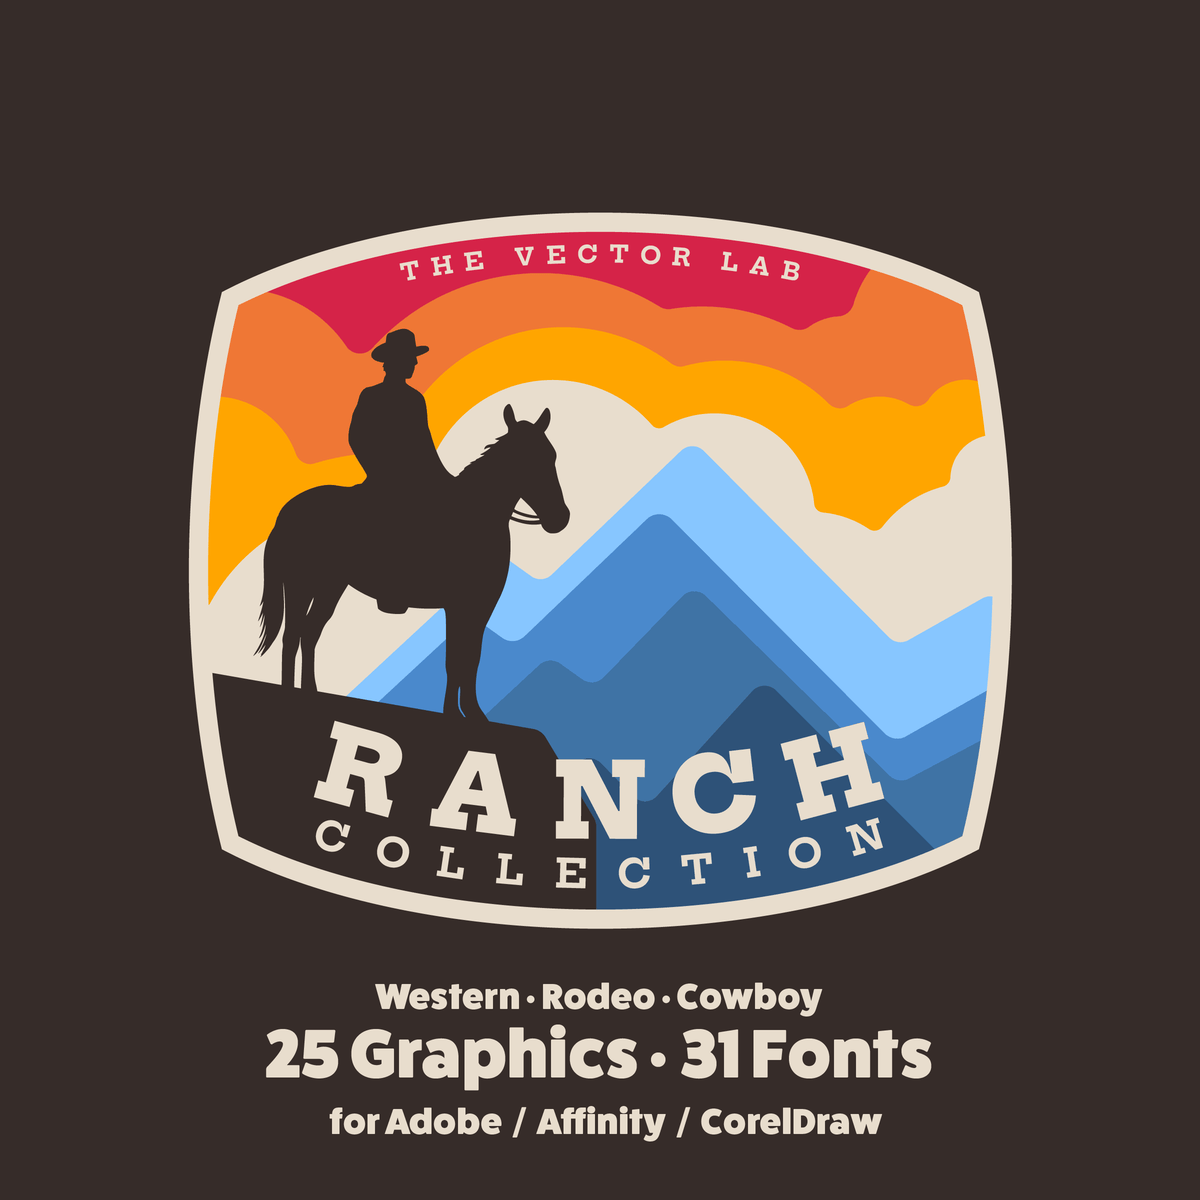 Ranch Collection of Graphic &amp; Logo Templates for Adobe Affinity CorelDraw